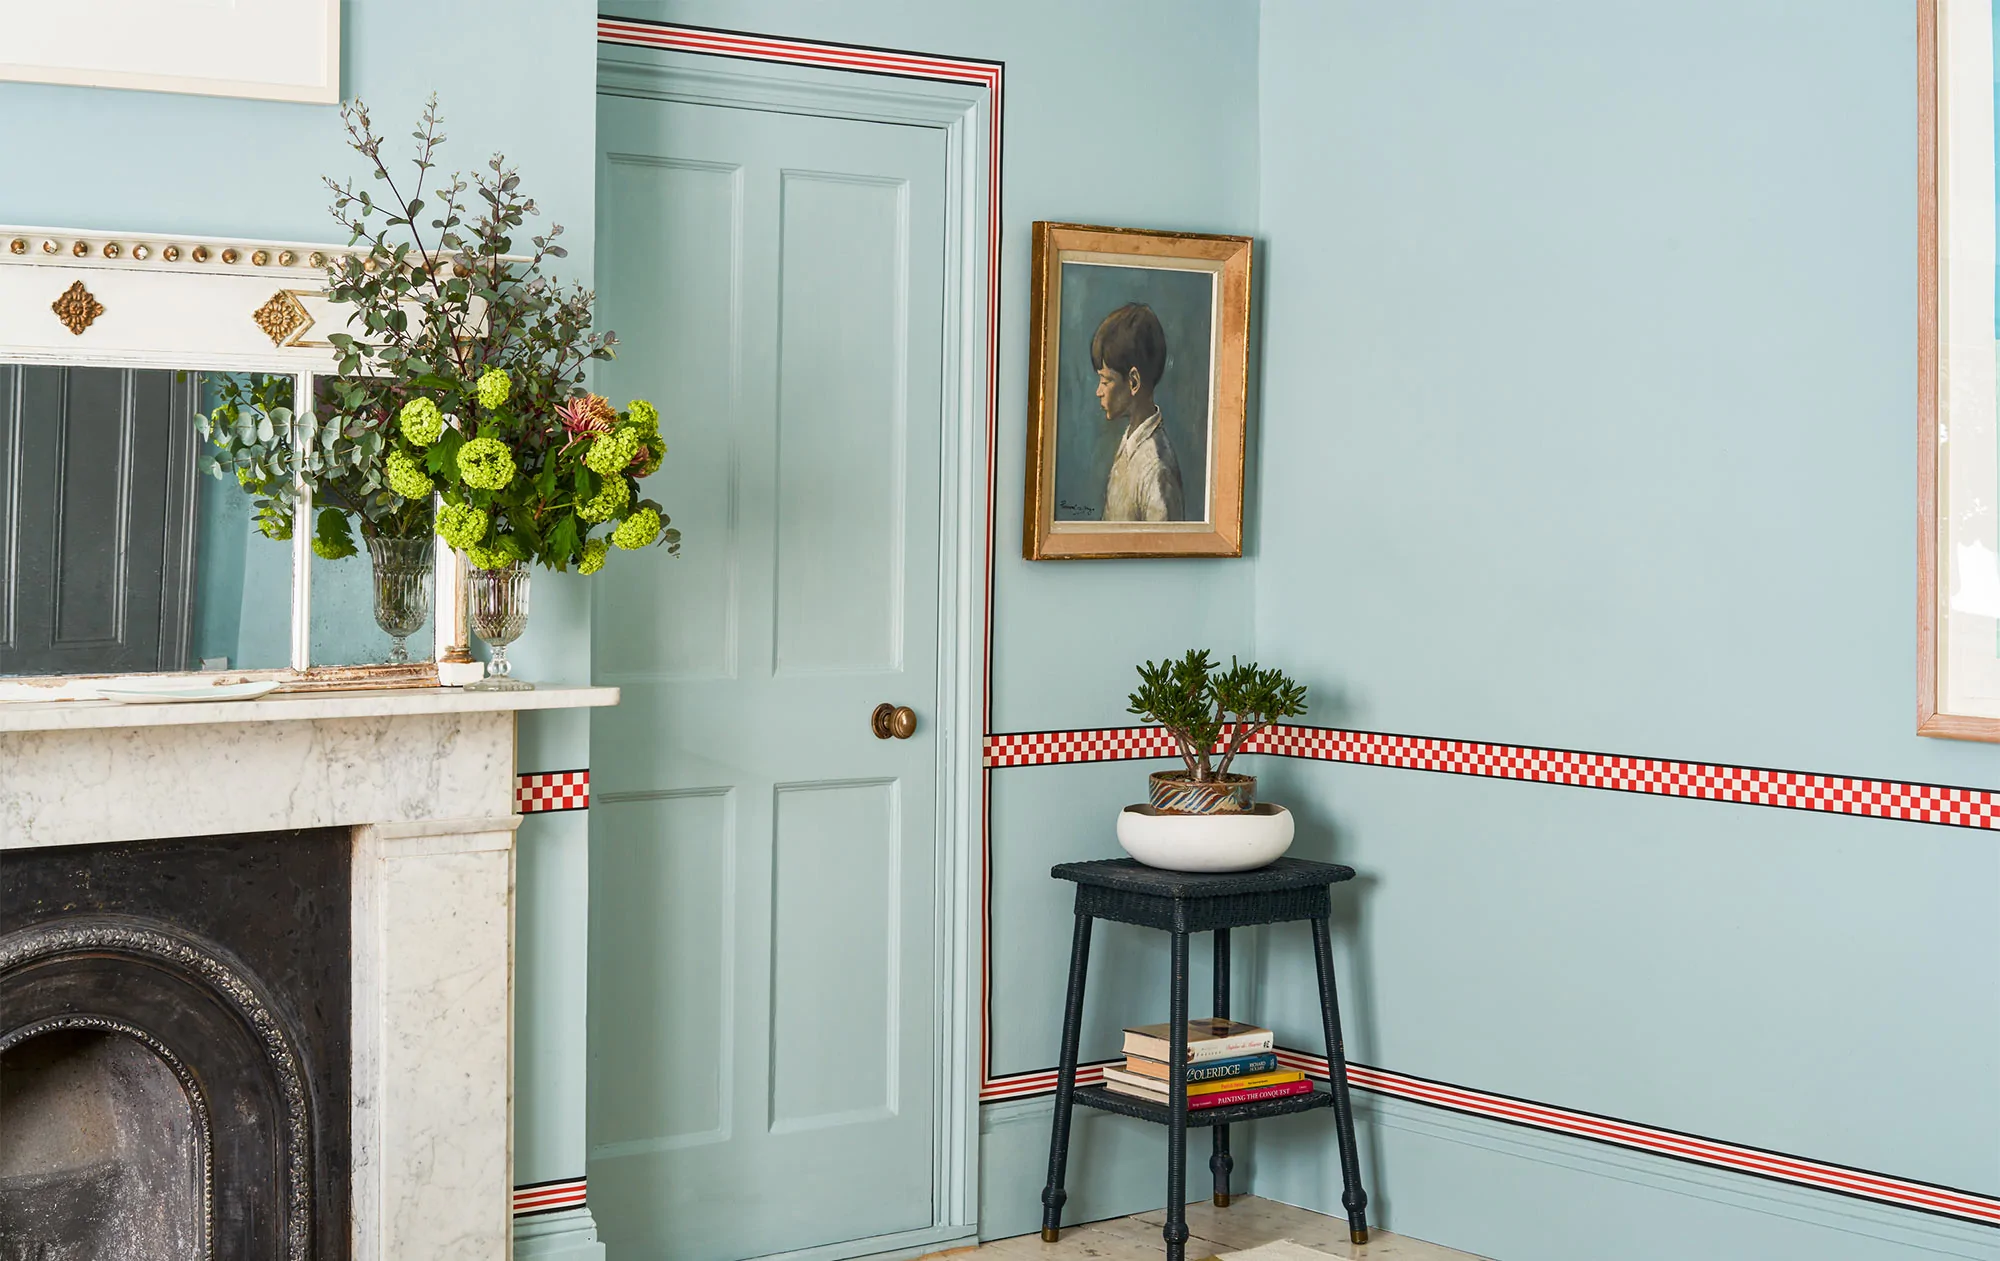 Wallpaper borders are back – here's how to style them